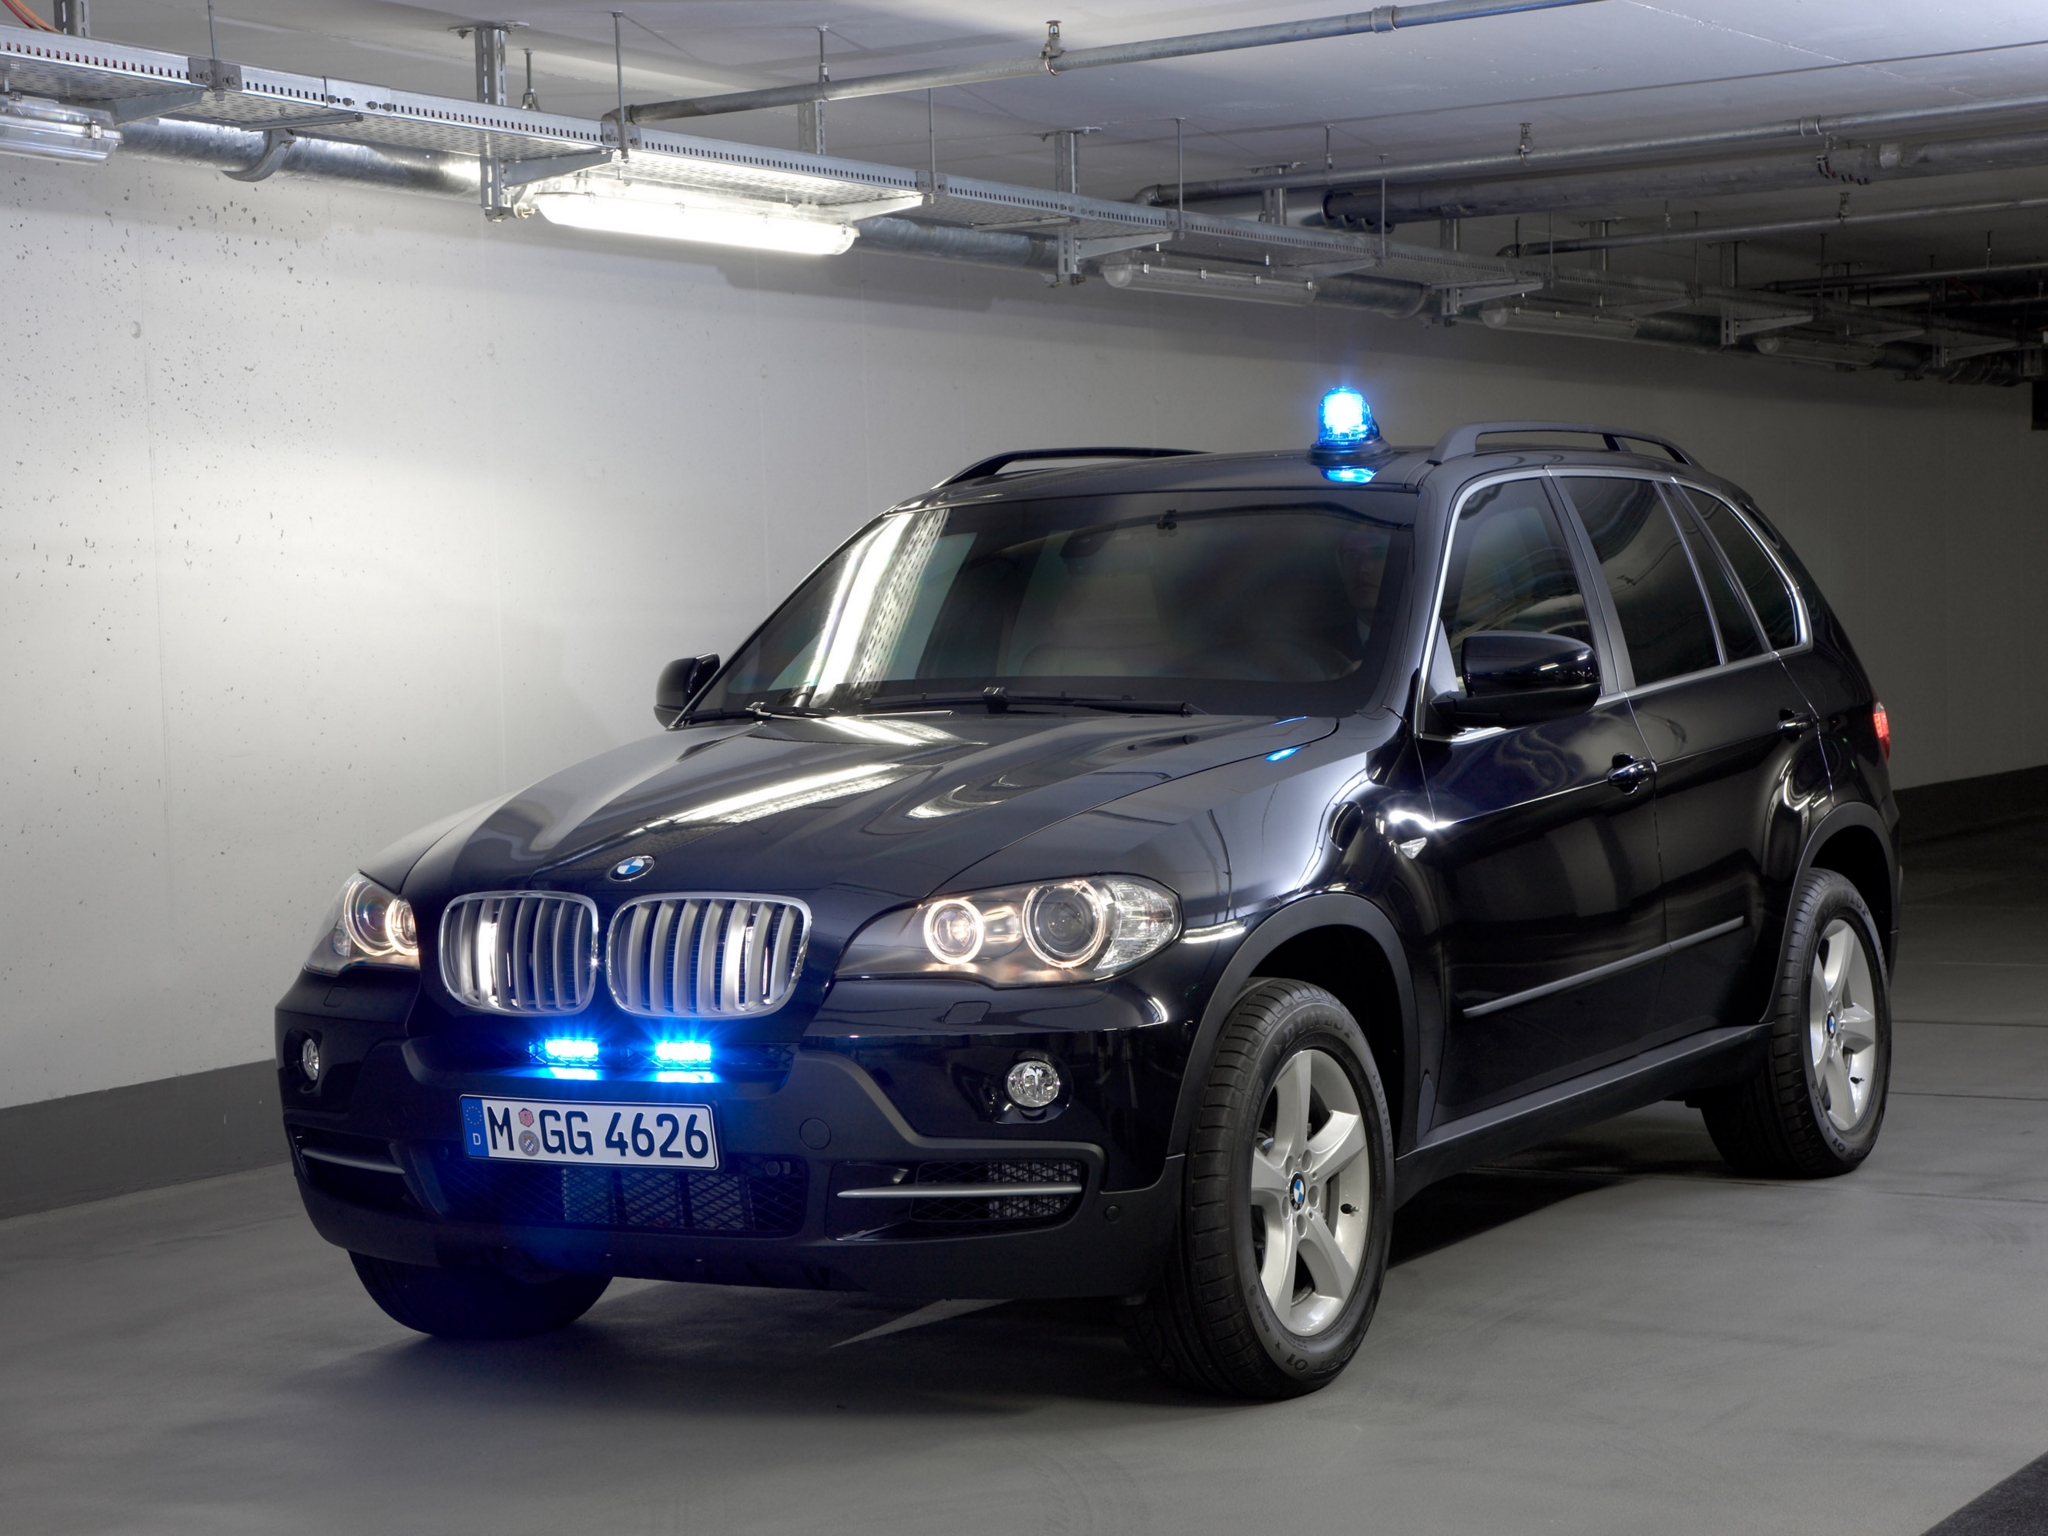 2009, Armored, Bmw, X 5, Security, Plus, E70, Suv, Police Wallpaper